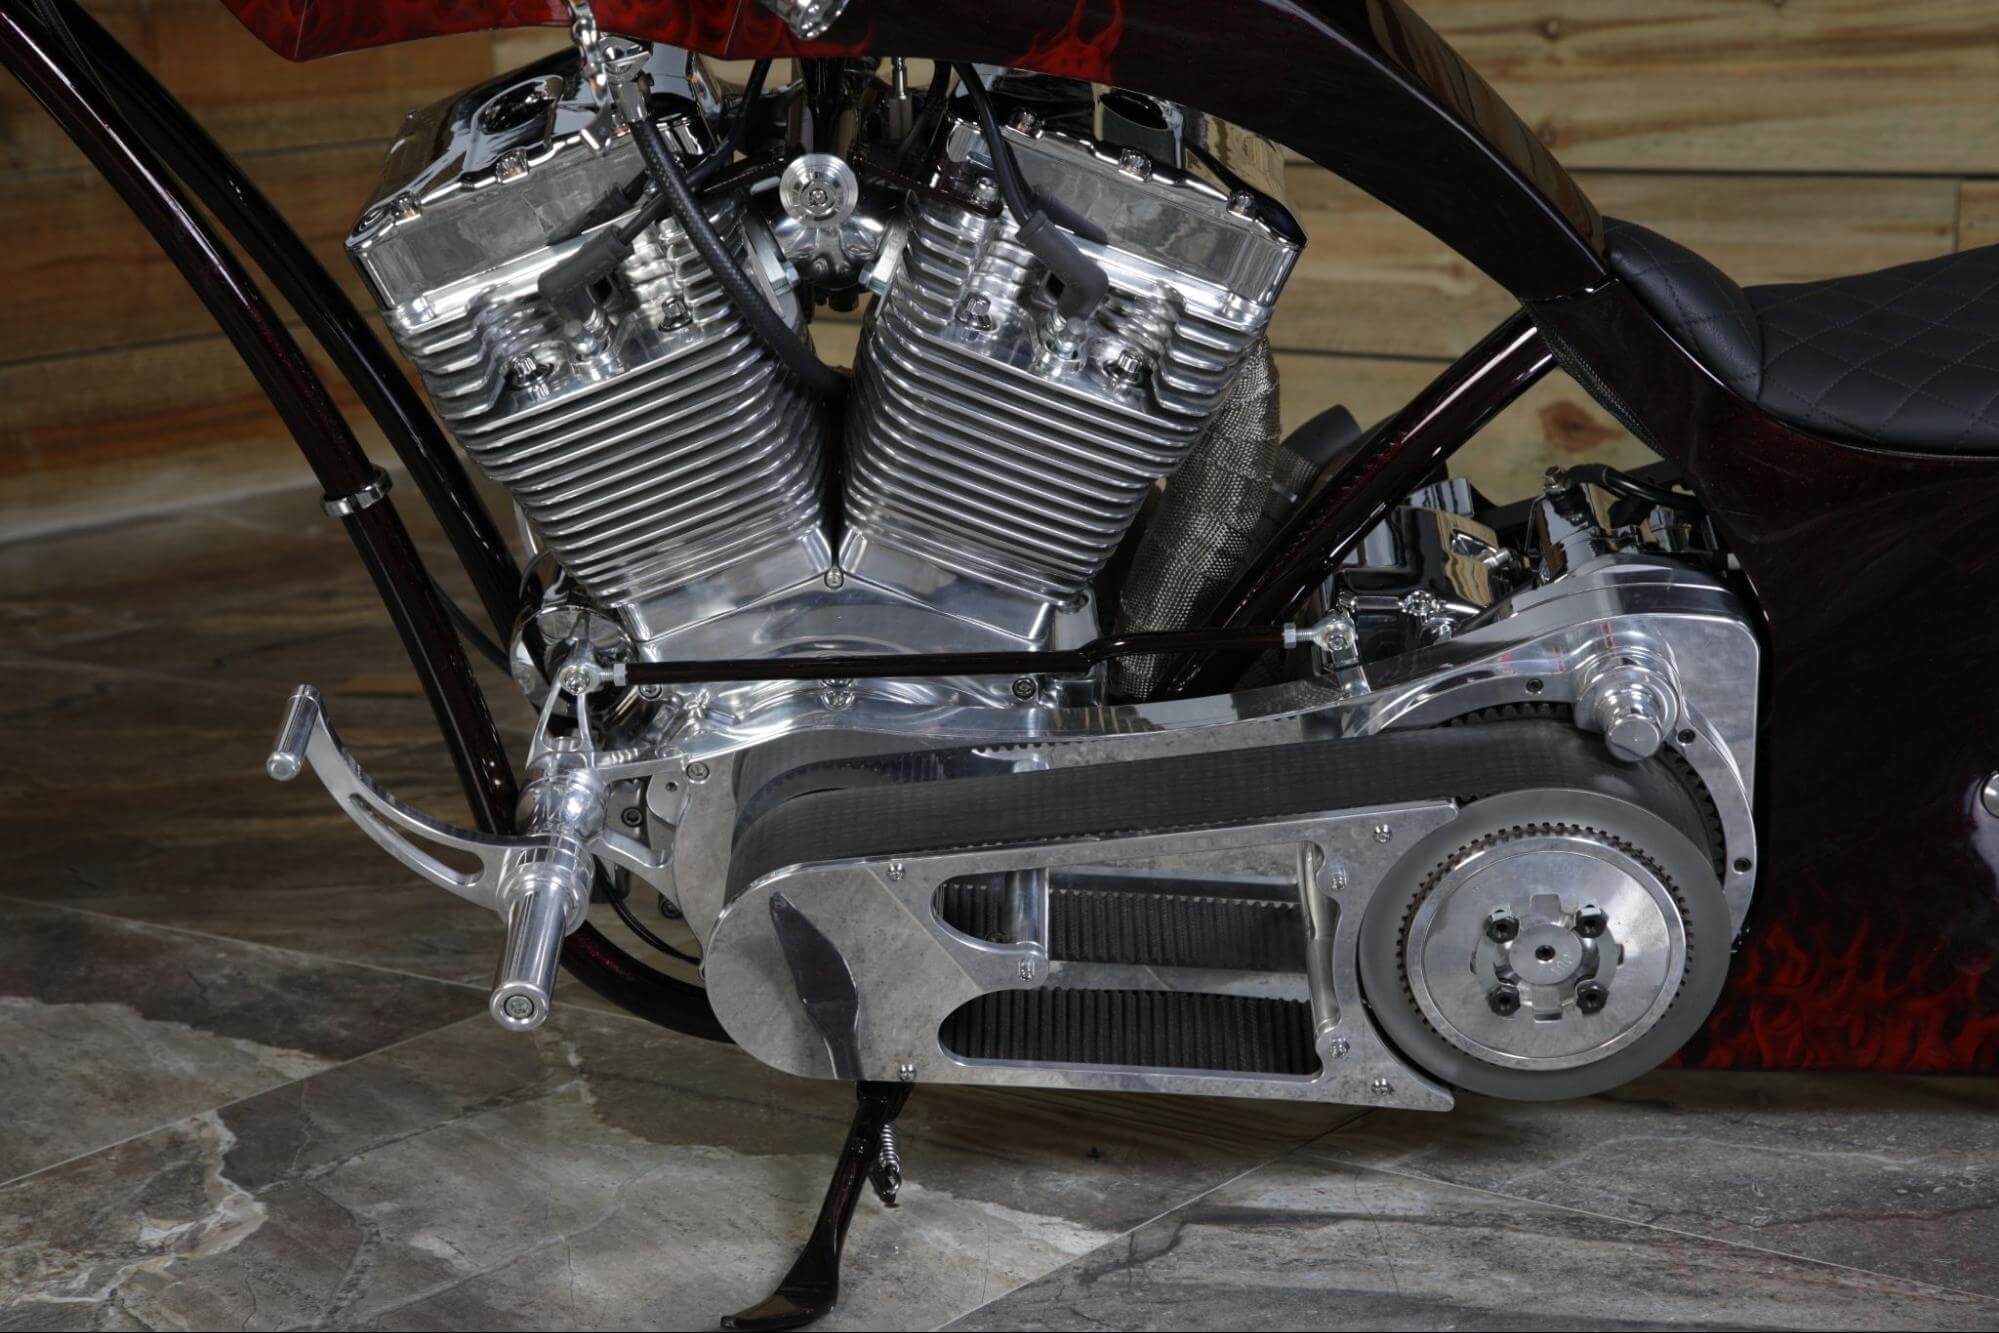 Chopper motorcycle parts